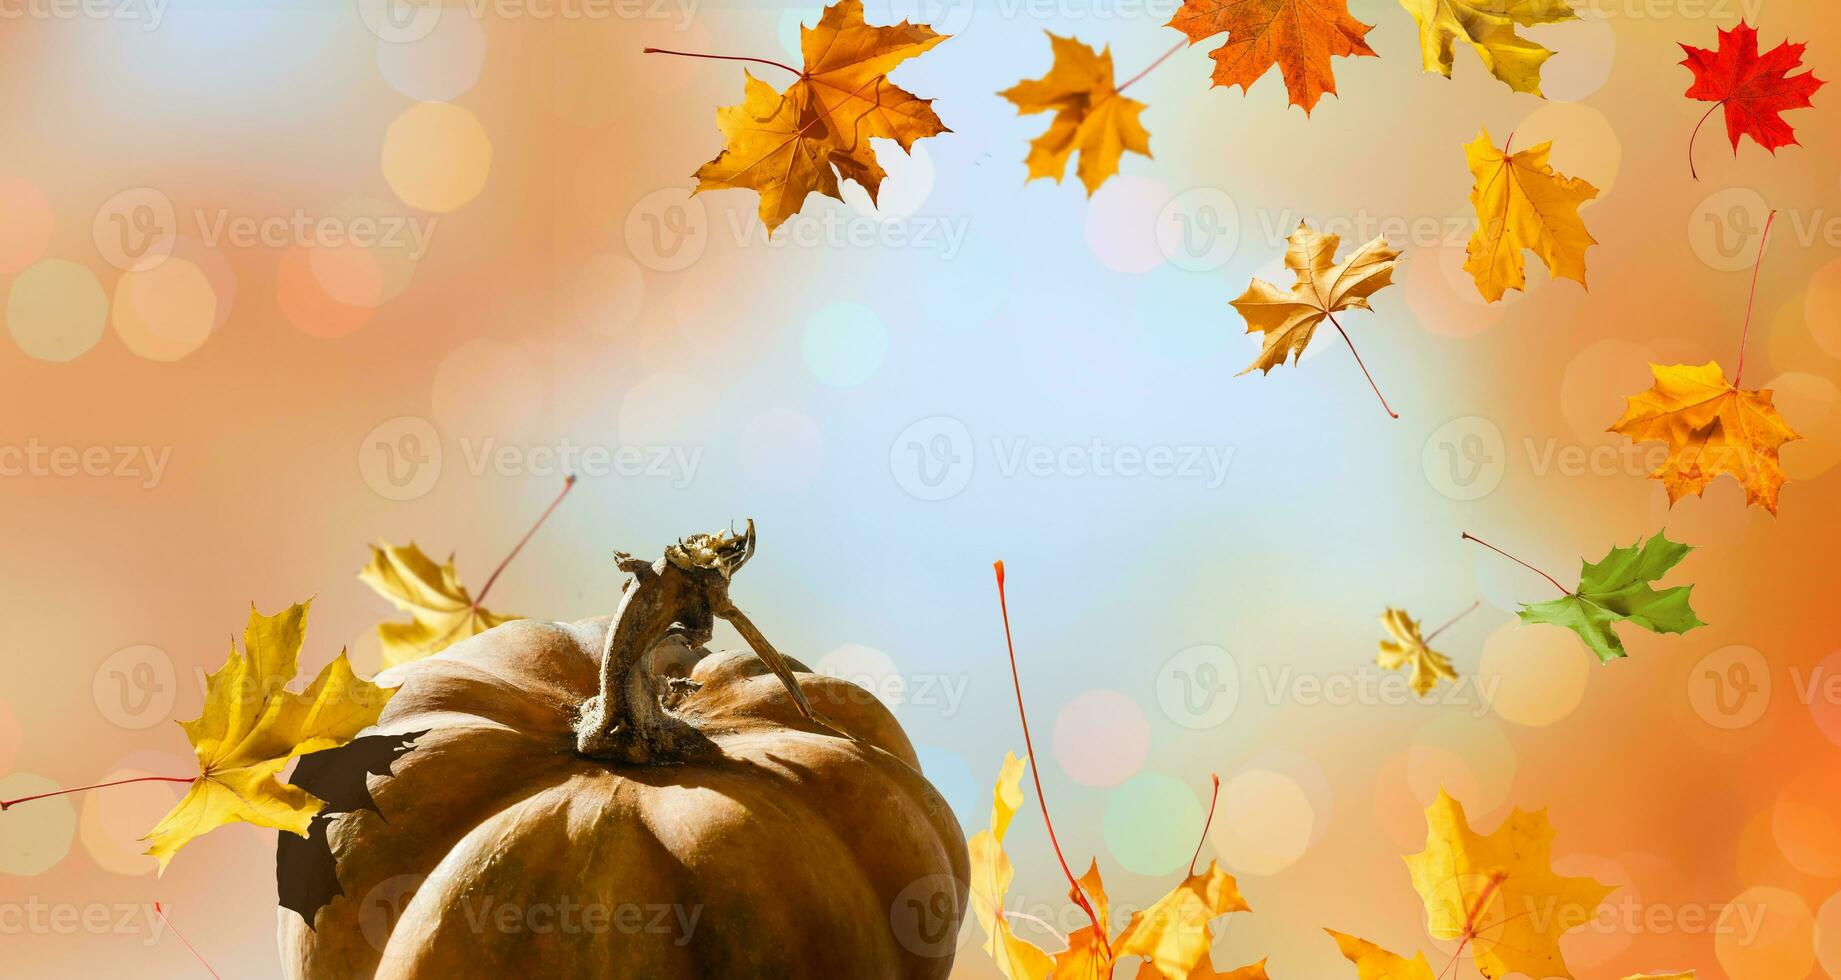 Autumn scene with pumpkins, Halloween or Thanksgiving background, copy space photo